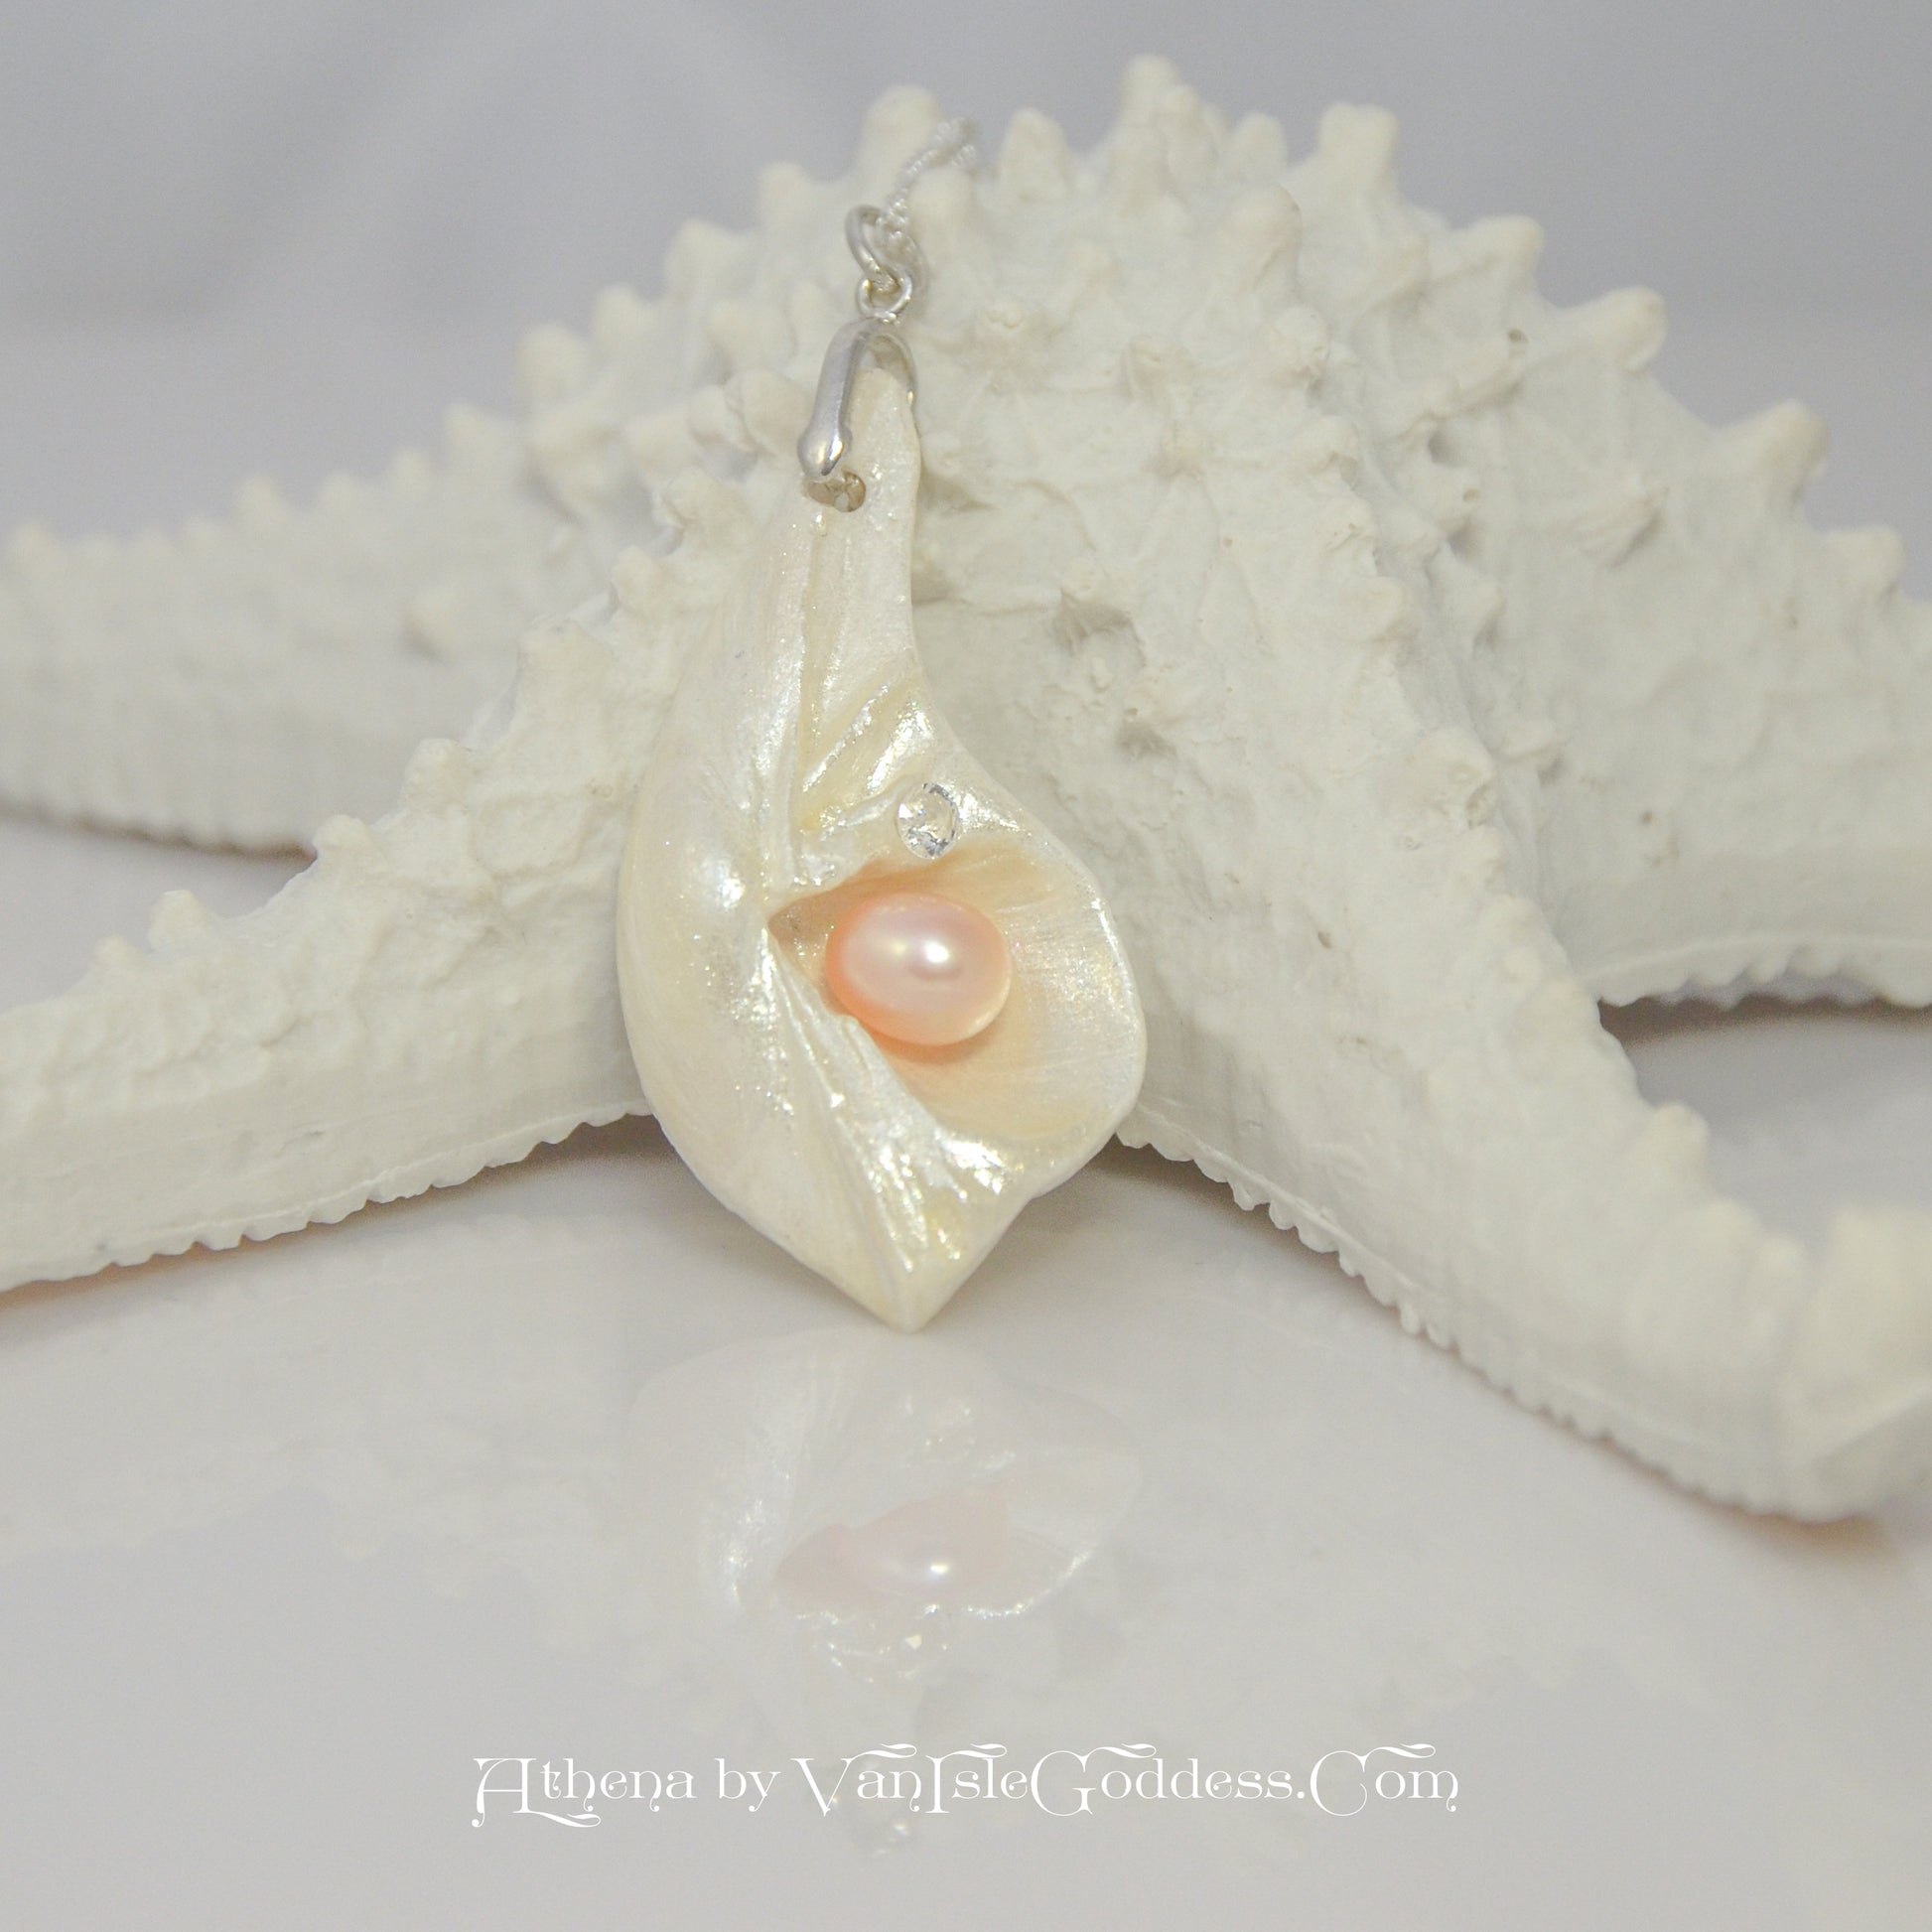 Athena is the name of the pendant being showcased.  It is a natural seashell from the beaches of Vancouver Island. The pendant has a real pink freshwater pearl and a faceted herkimer diamond. It is being showcased on a starfish.